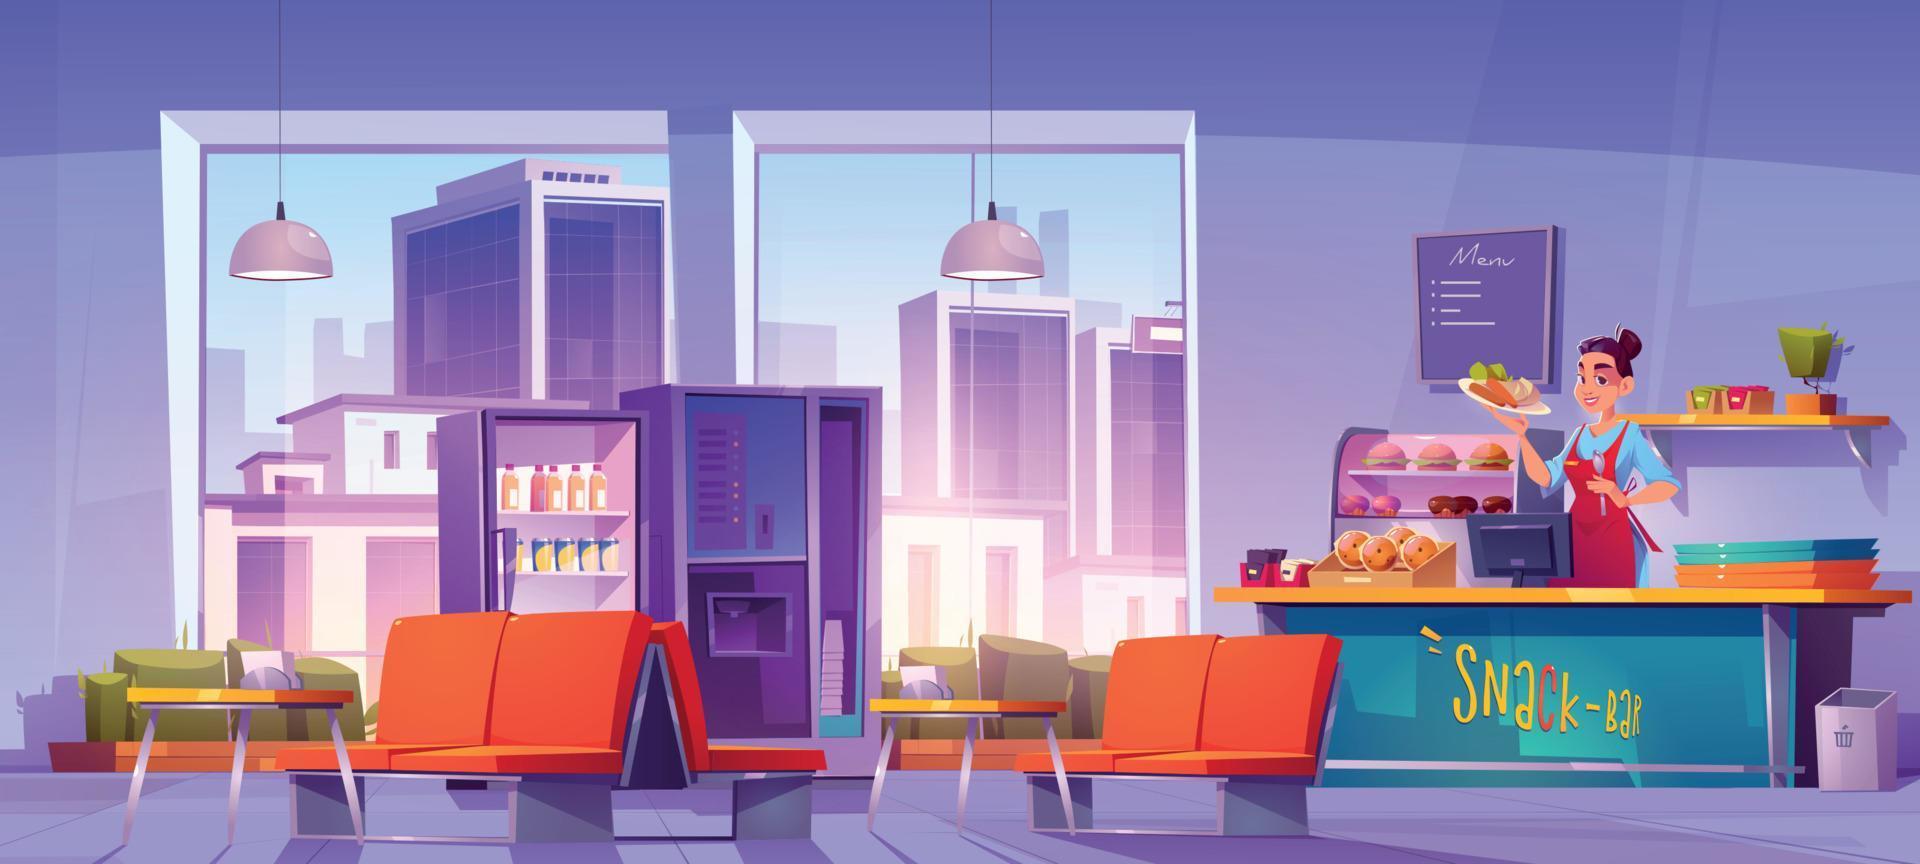 Cafe interior with city view, fast food canteen vector